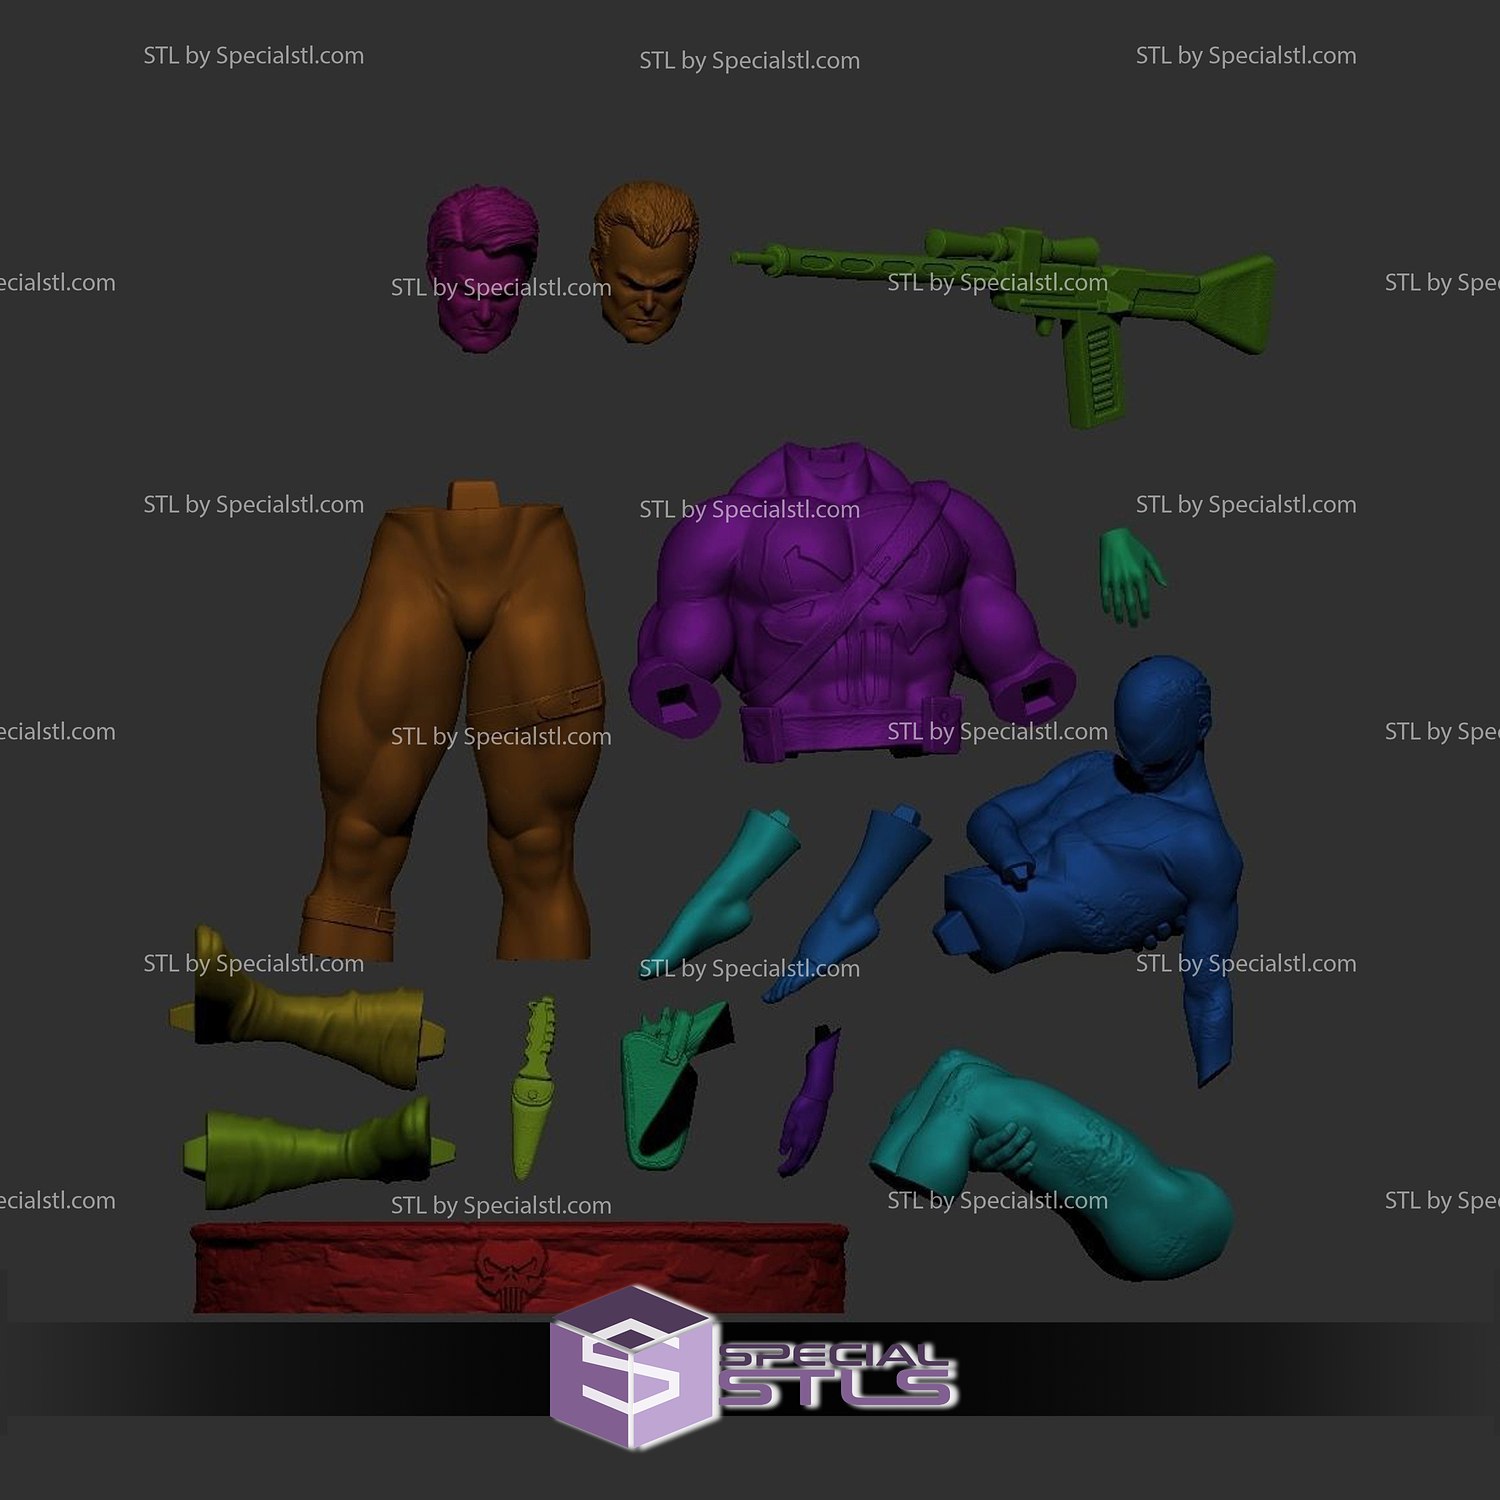 Spiderman And Punisher 3D Printing Model STL Files